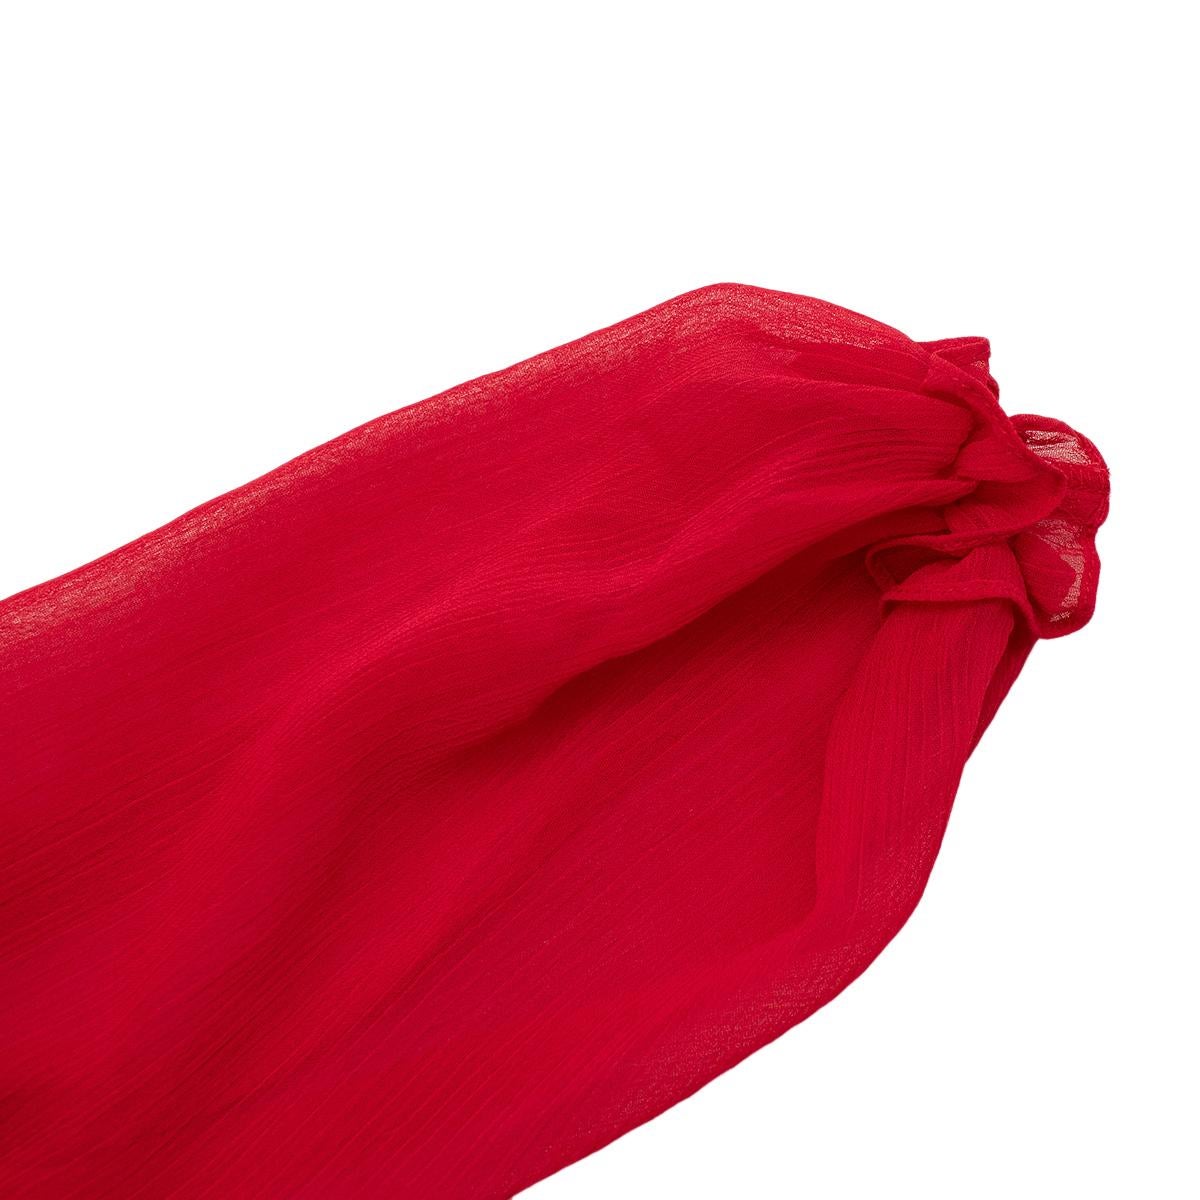 Maje Red Long Muslin Dress with Ruffles - Size M For Sale 1